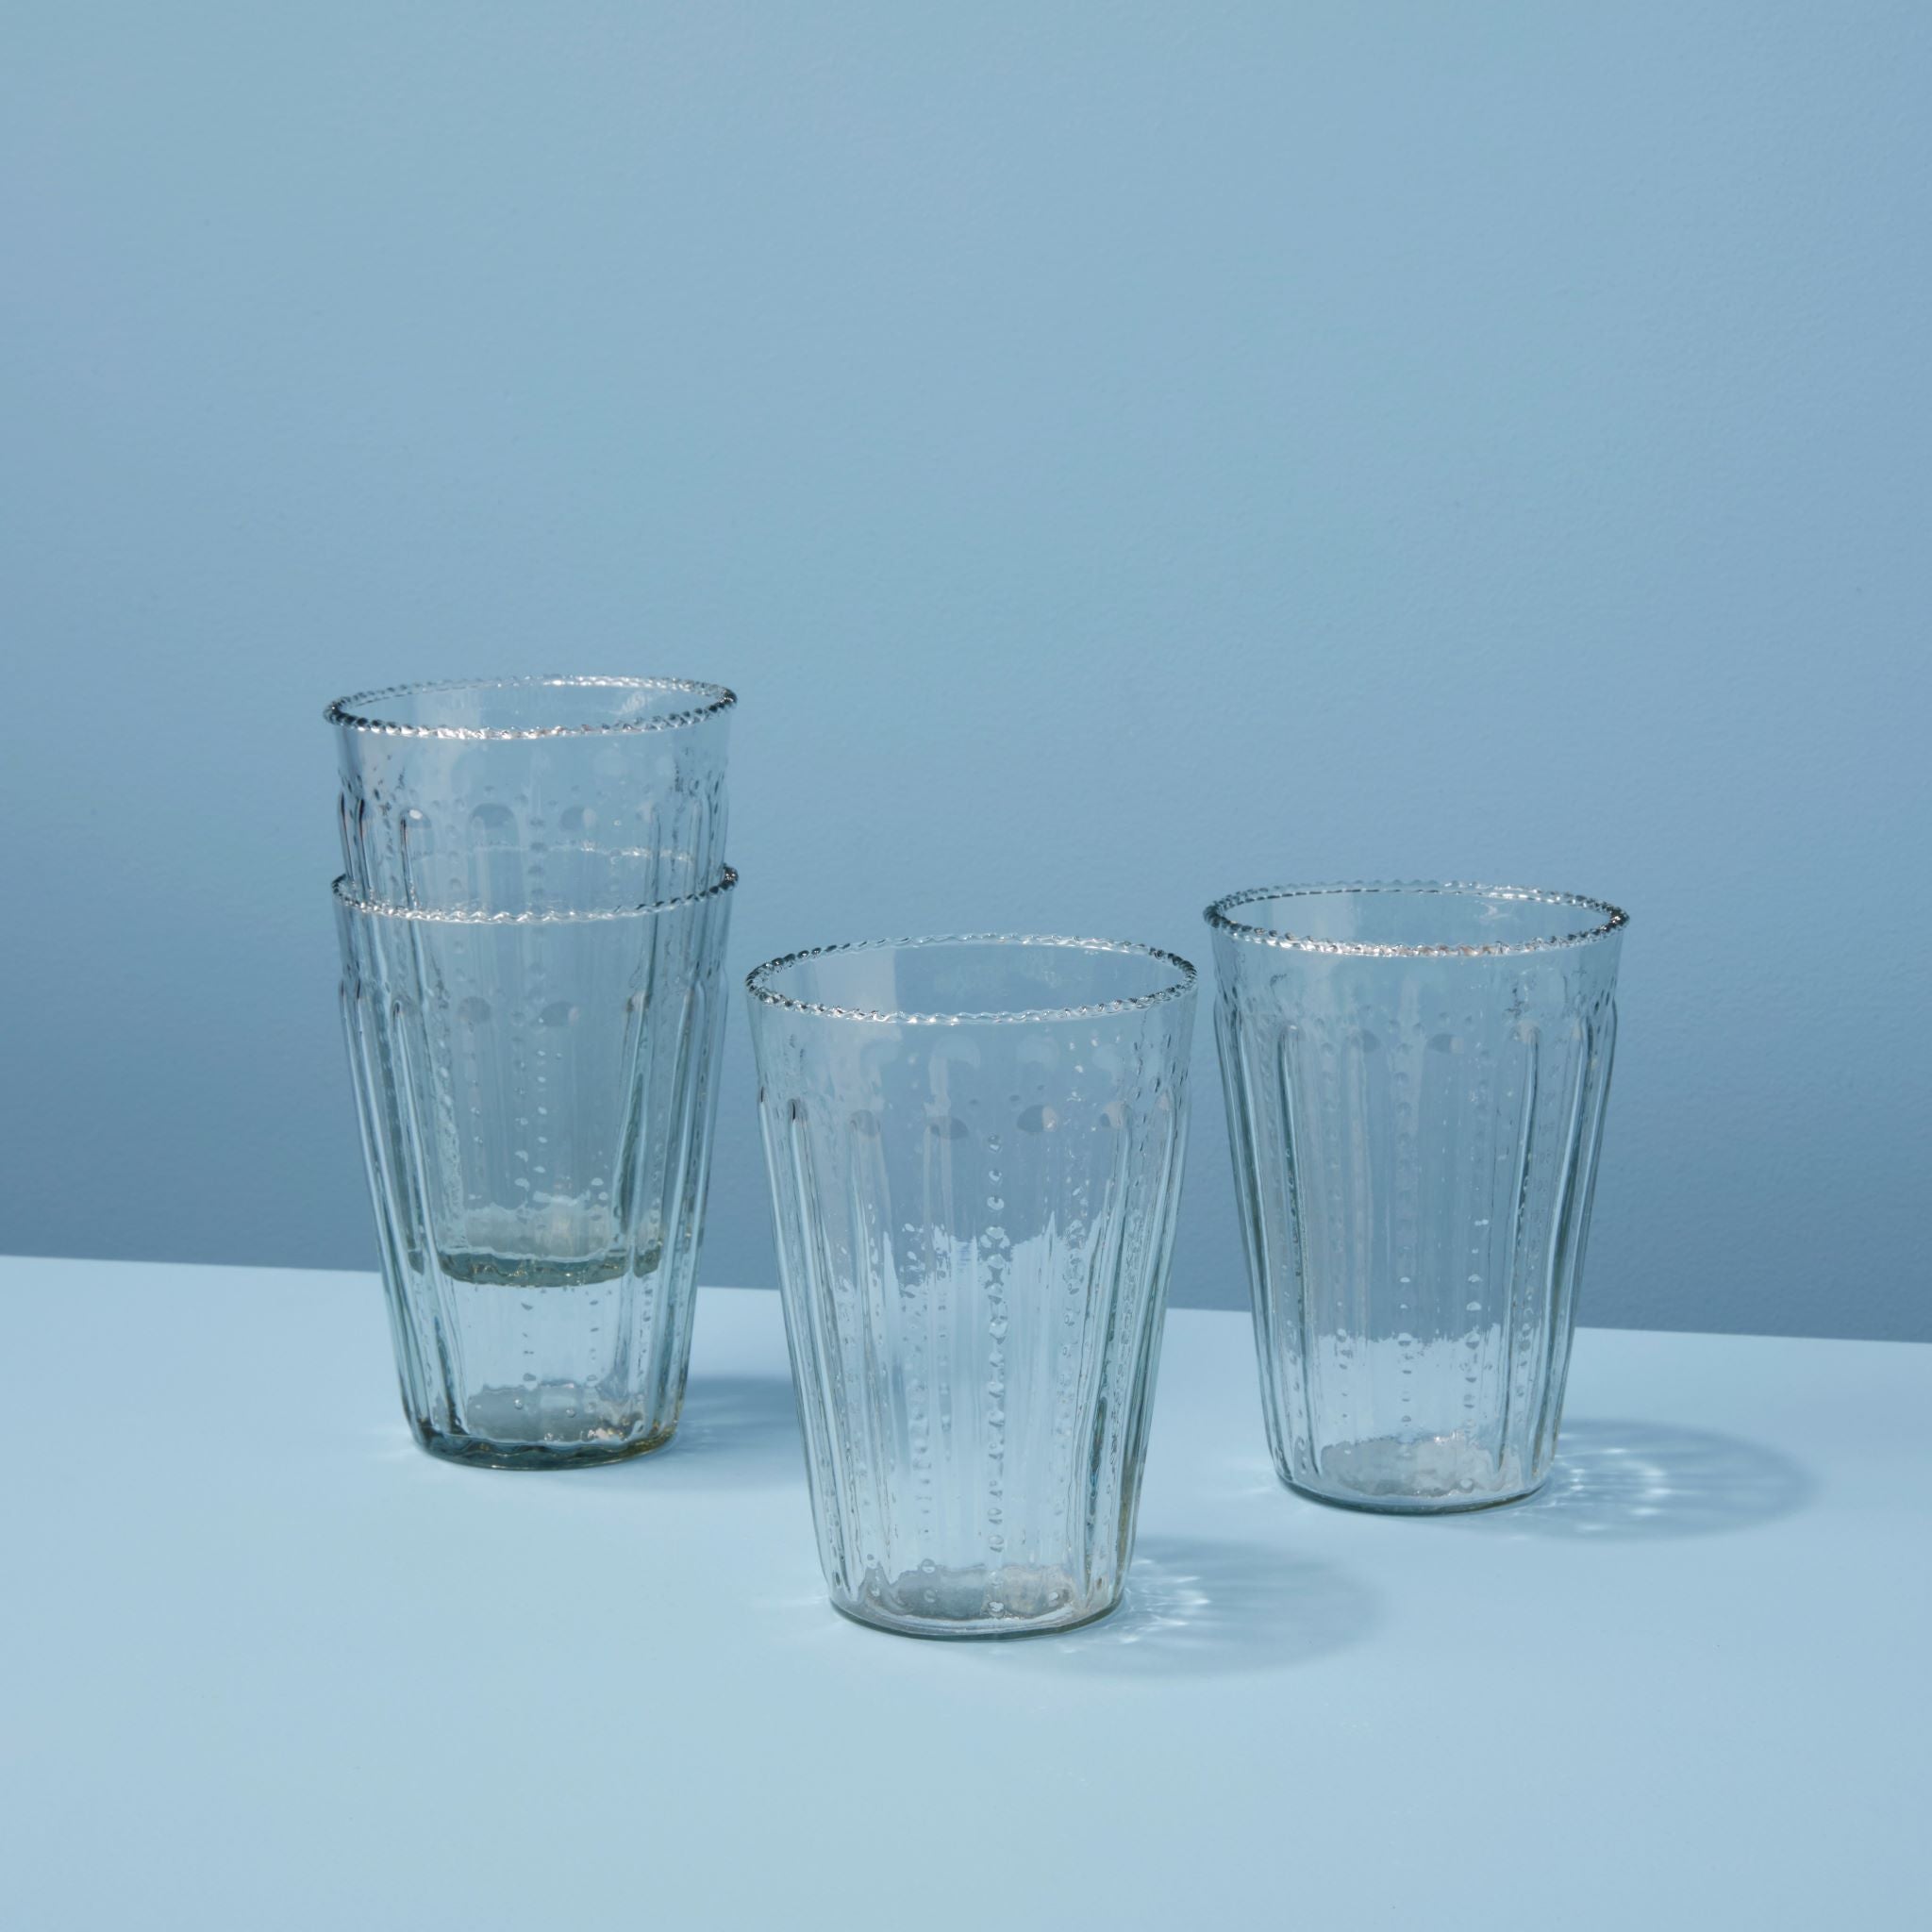 Premium Recycled Footed Tumbler, Set of 4 – Be Home